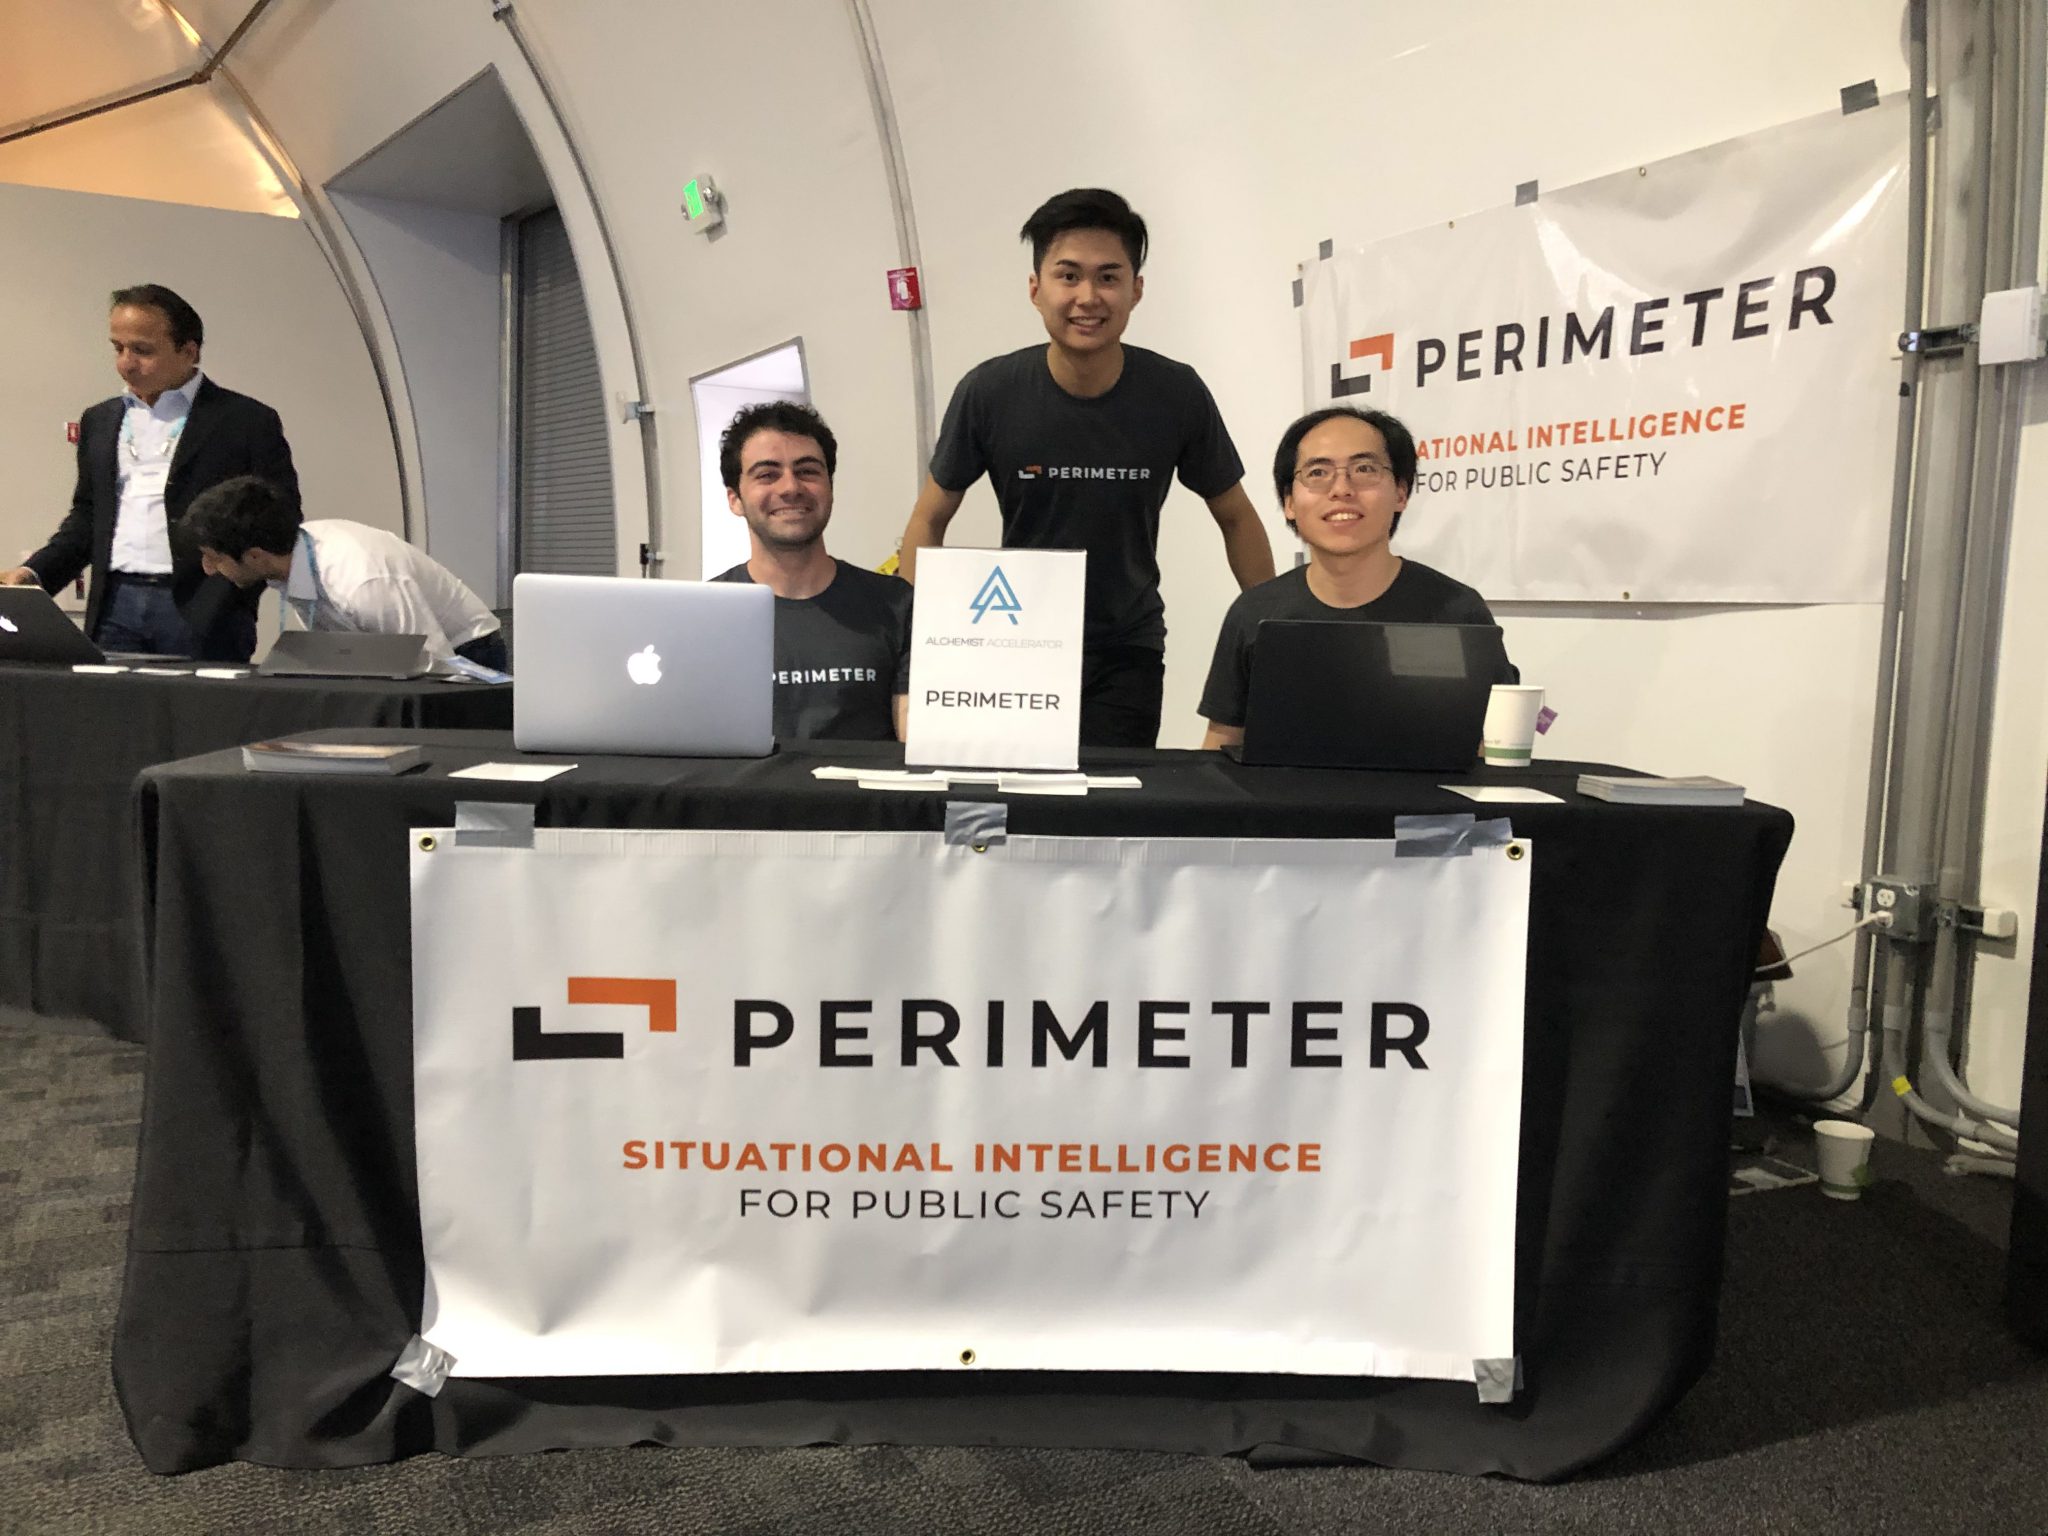 Co-founder and CTO Noah Wu oversees the Perimeter team's table at Demo Day, alongside team members Jacob Green and Moor Xu.